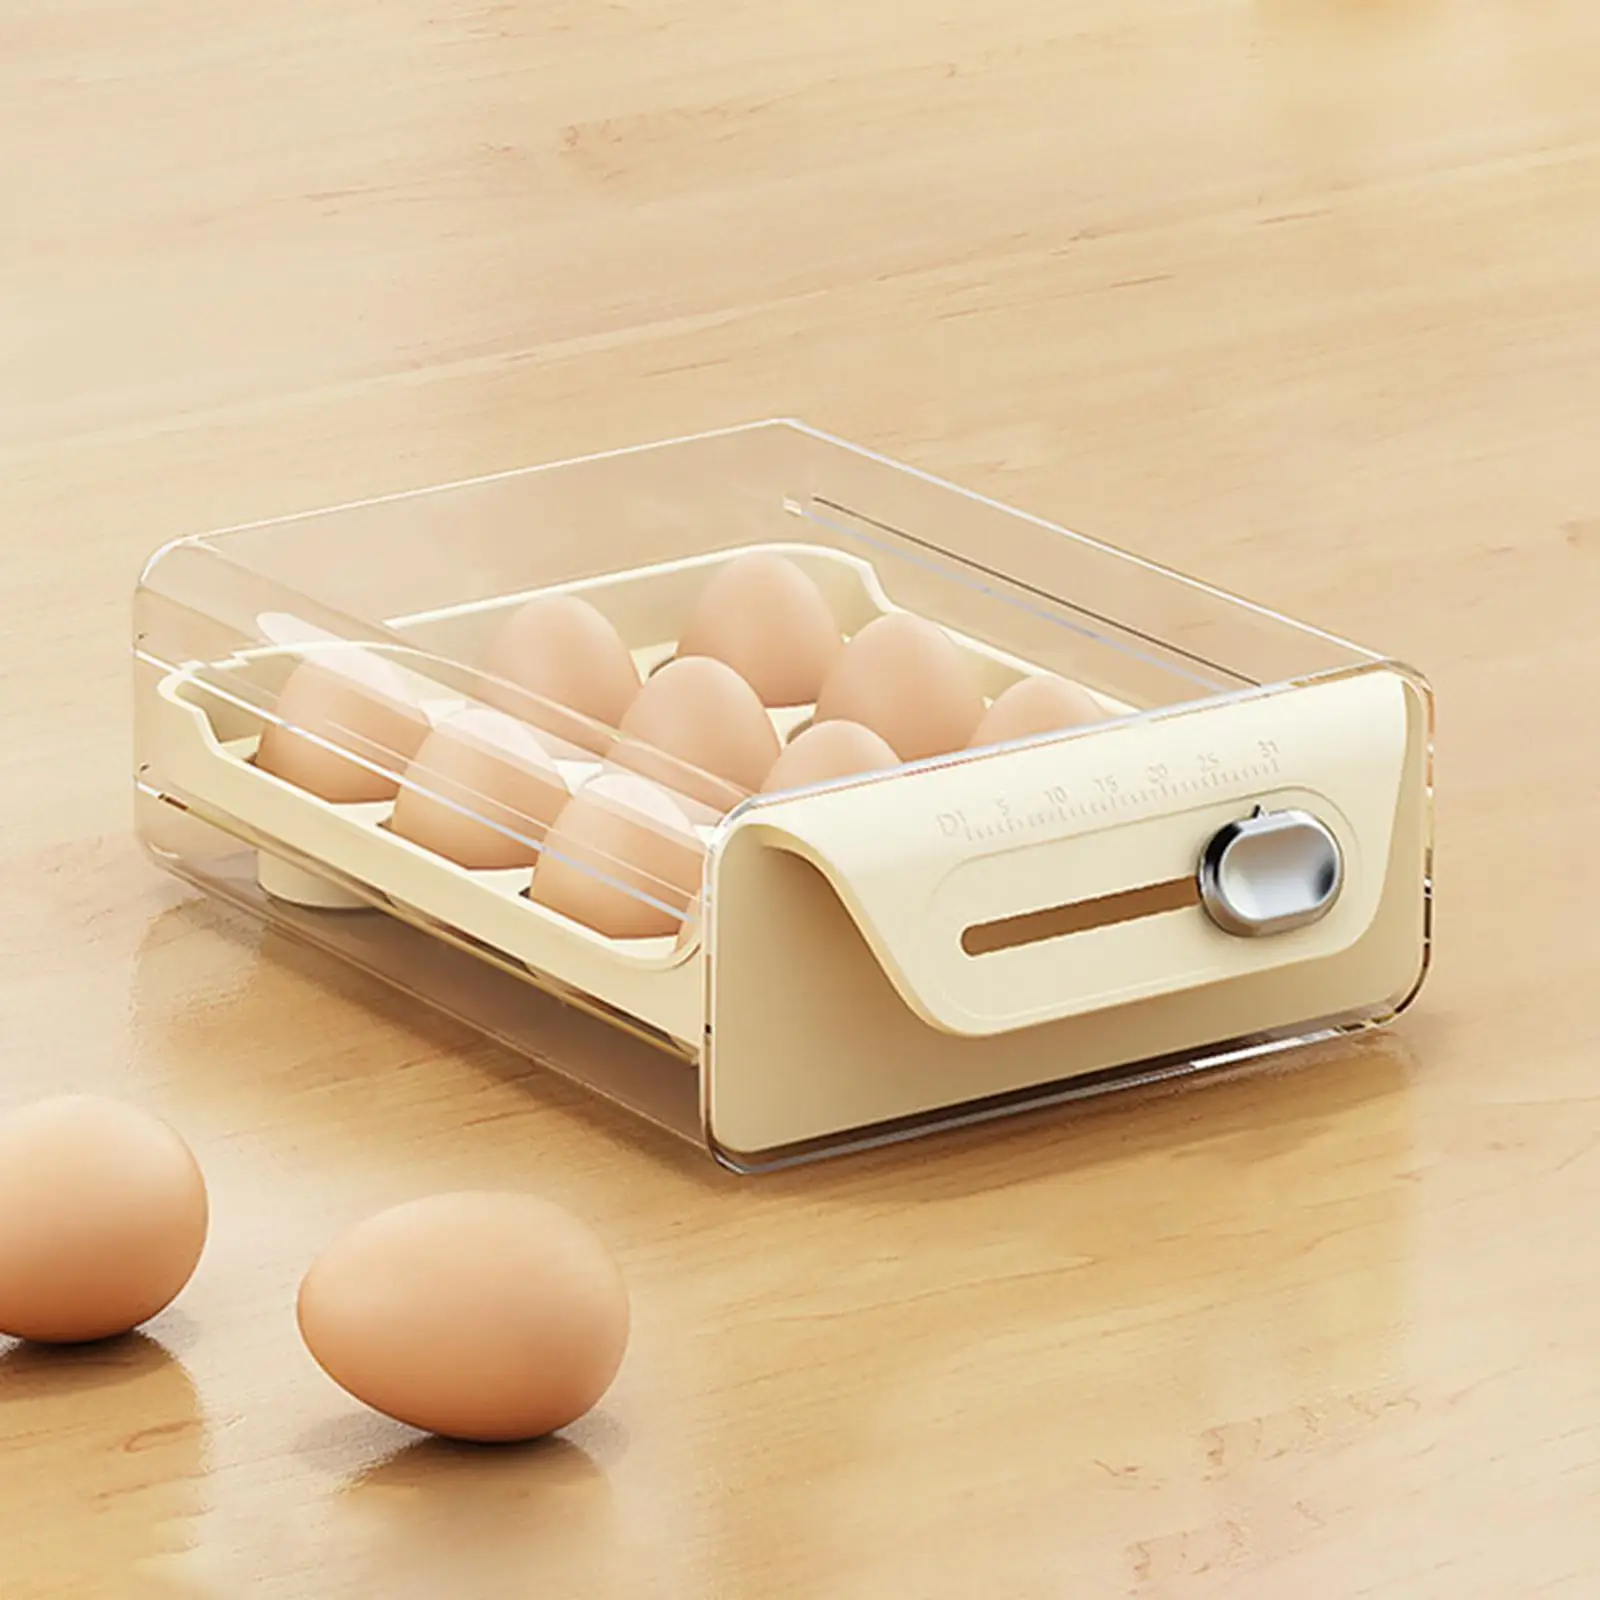 Egg Holder with Time Scale Reusable Eggd Tray with Drawer Egg Organizer for Refrigerator Dining Table Kitchen Freezer Pantry